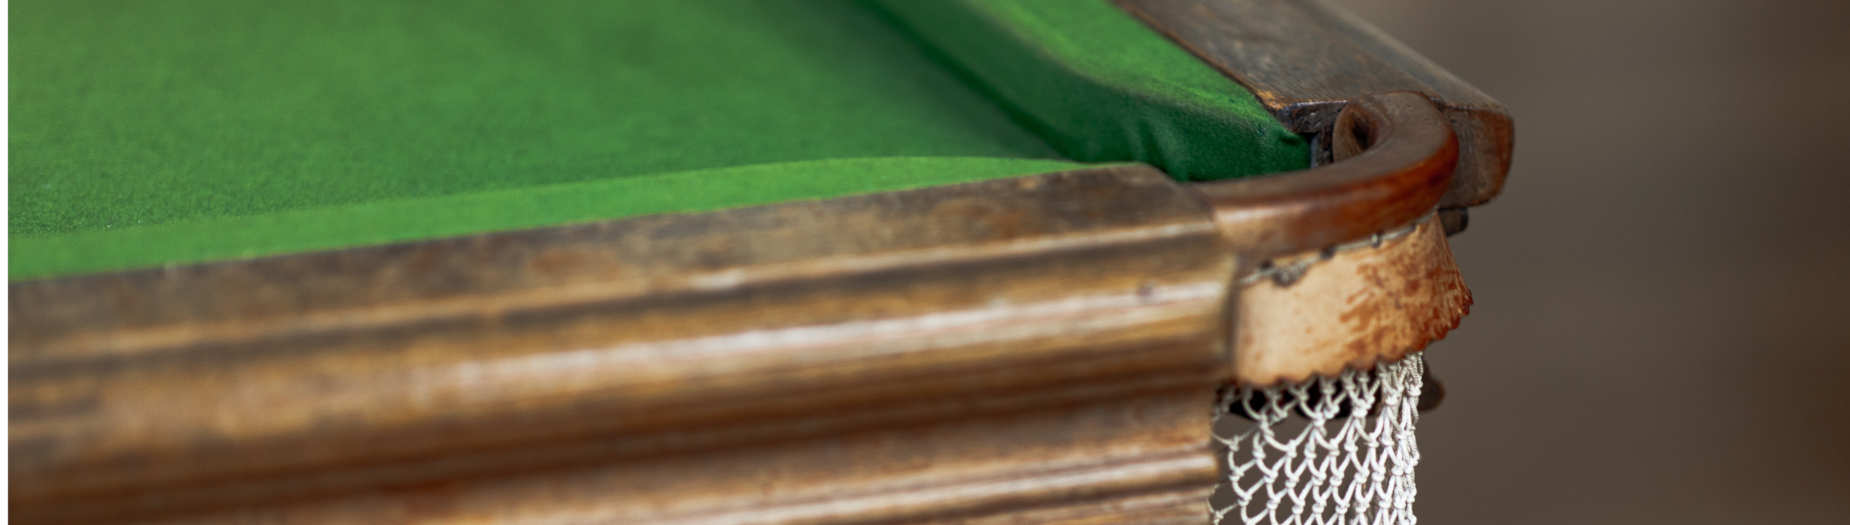 wooden snooker table